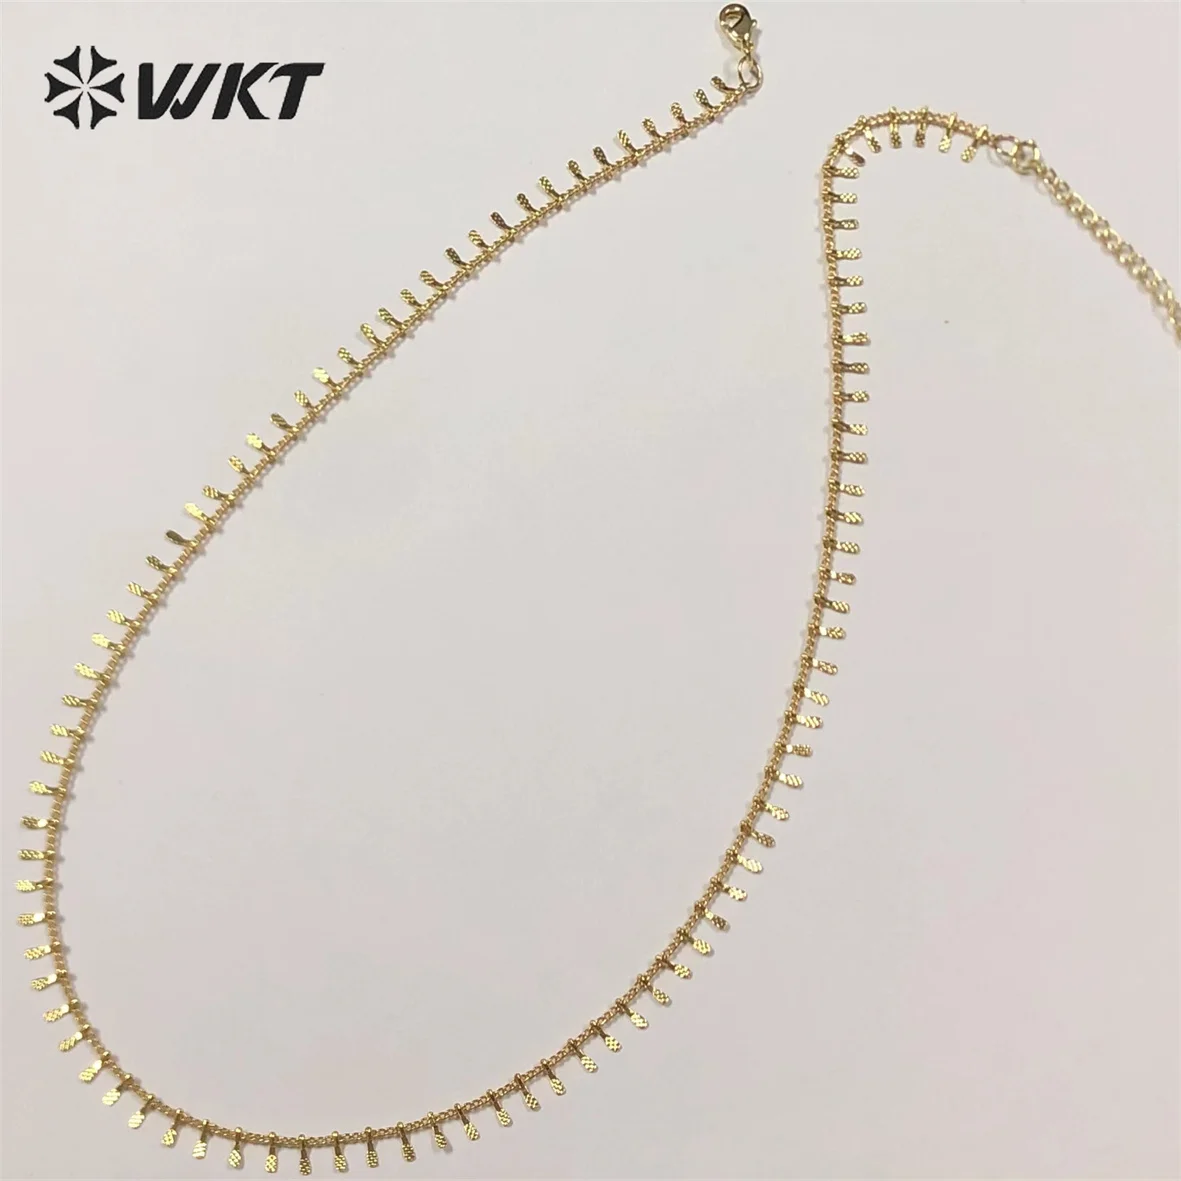 

WT-BFN039 WKT Simple Style Gold Plated Brass Chain Necklace Small Leaf Fringe Cute Style Ladies Necklace Jewelry Gift 5pcs